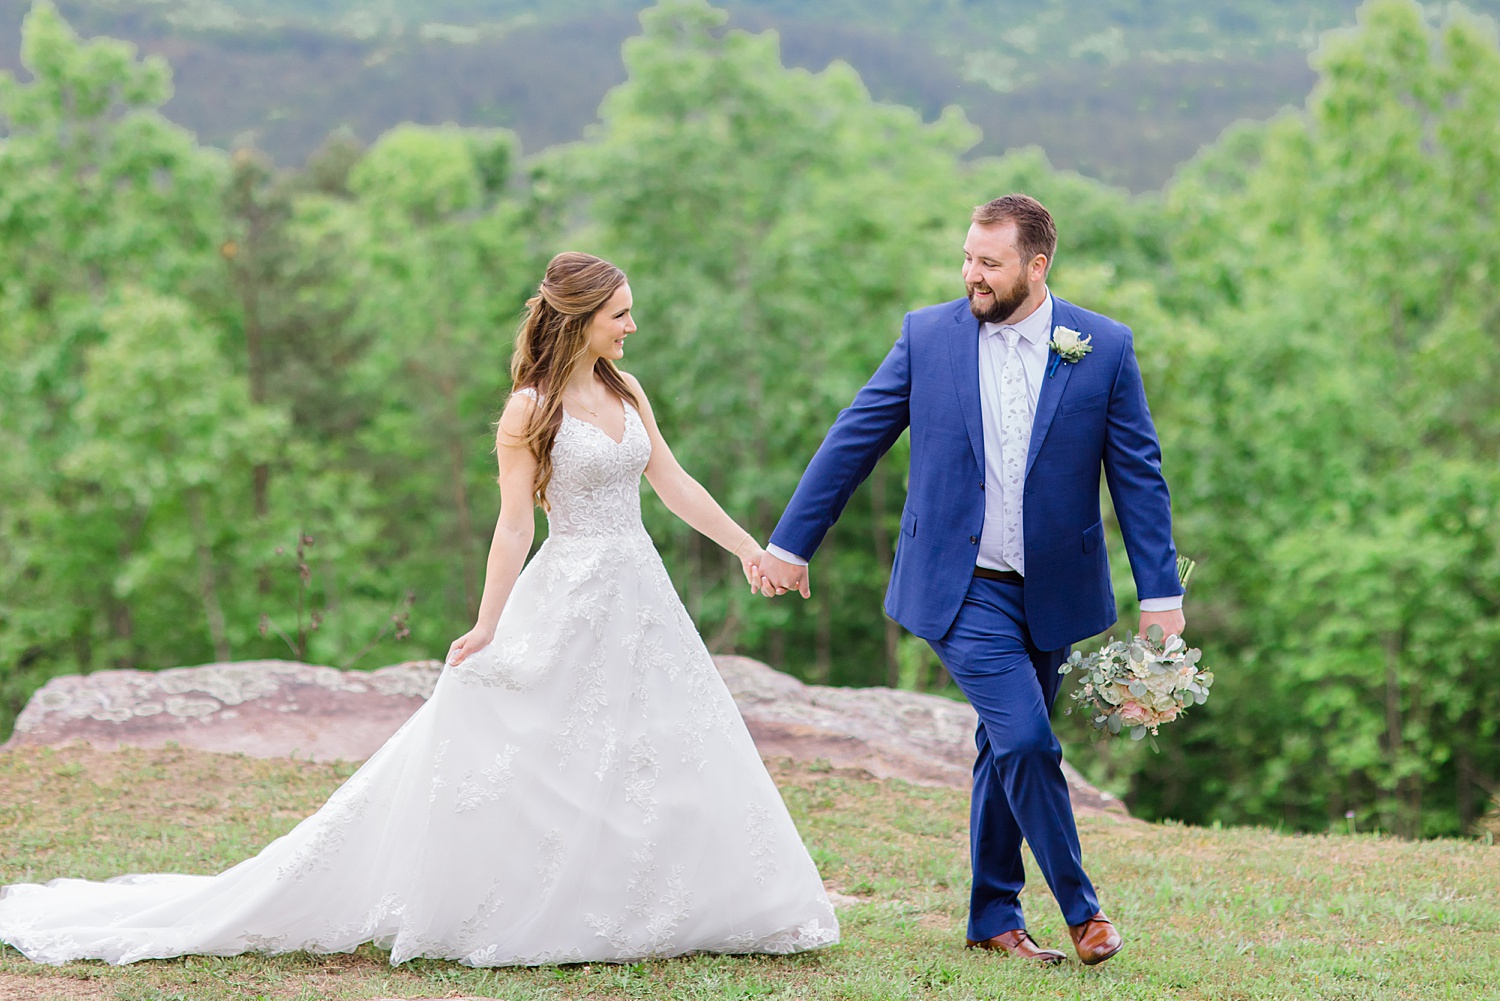 man leads his bride as they walk together 